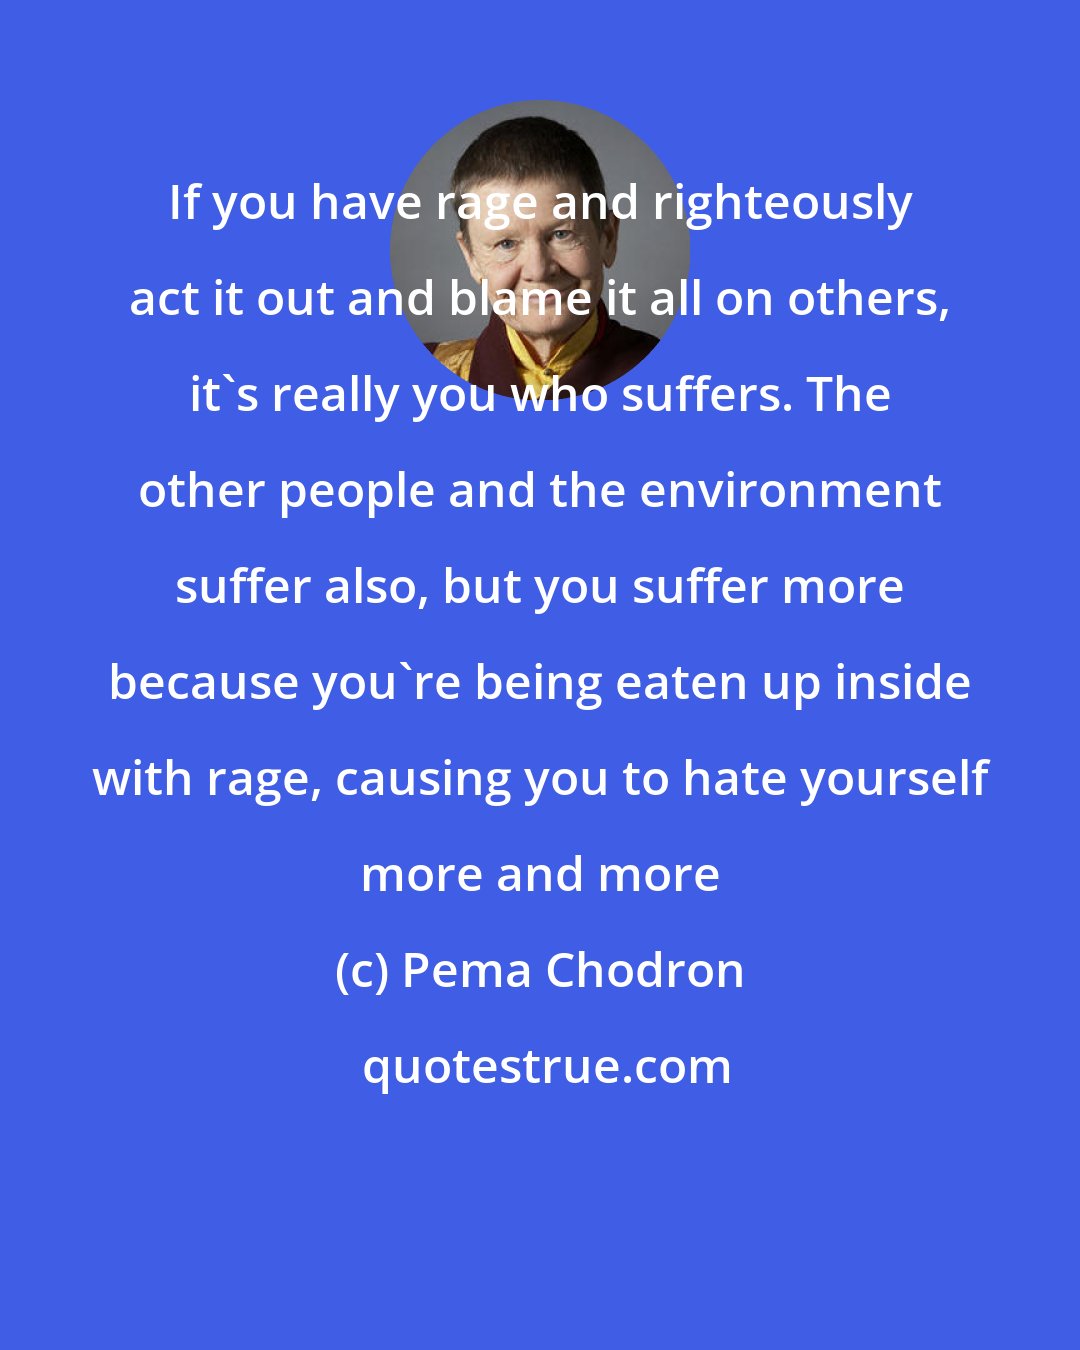 Pema Chodron: If you have rage and righteously act it out and blame it all on others, it's really you who suffers. The other people and the environment suffer also, but you suffer more because you're being eaten up inside with rage, causing you to hate yourself more and more